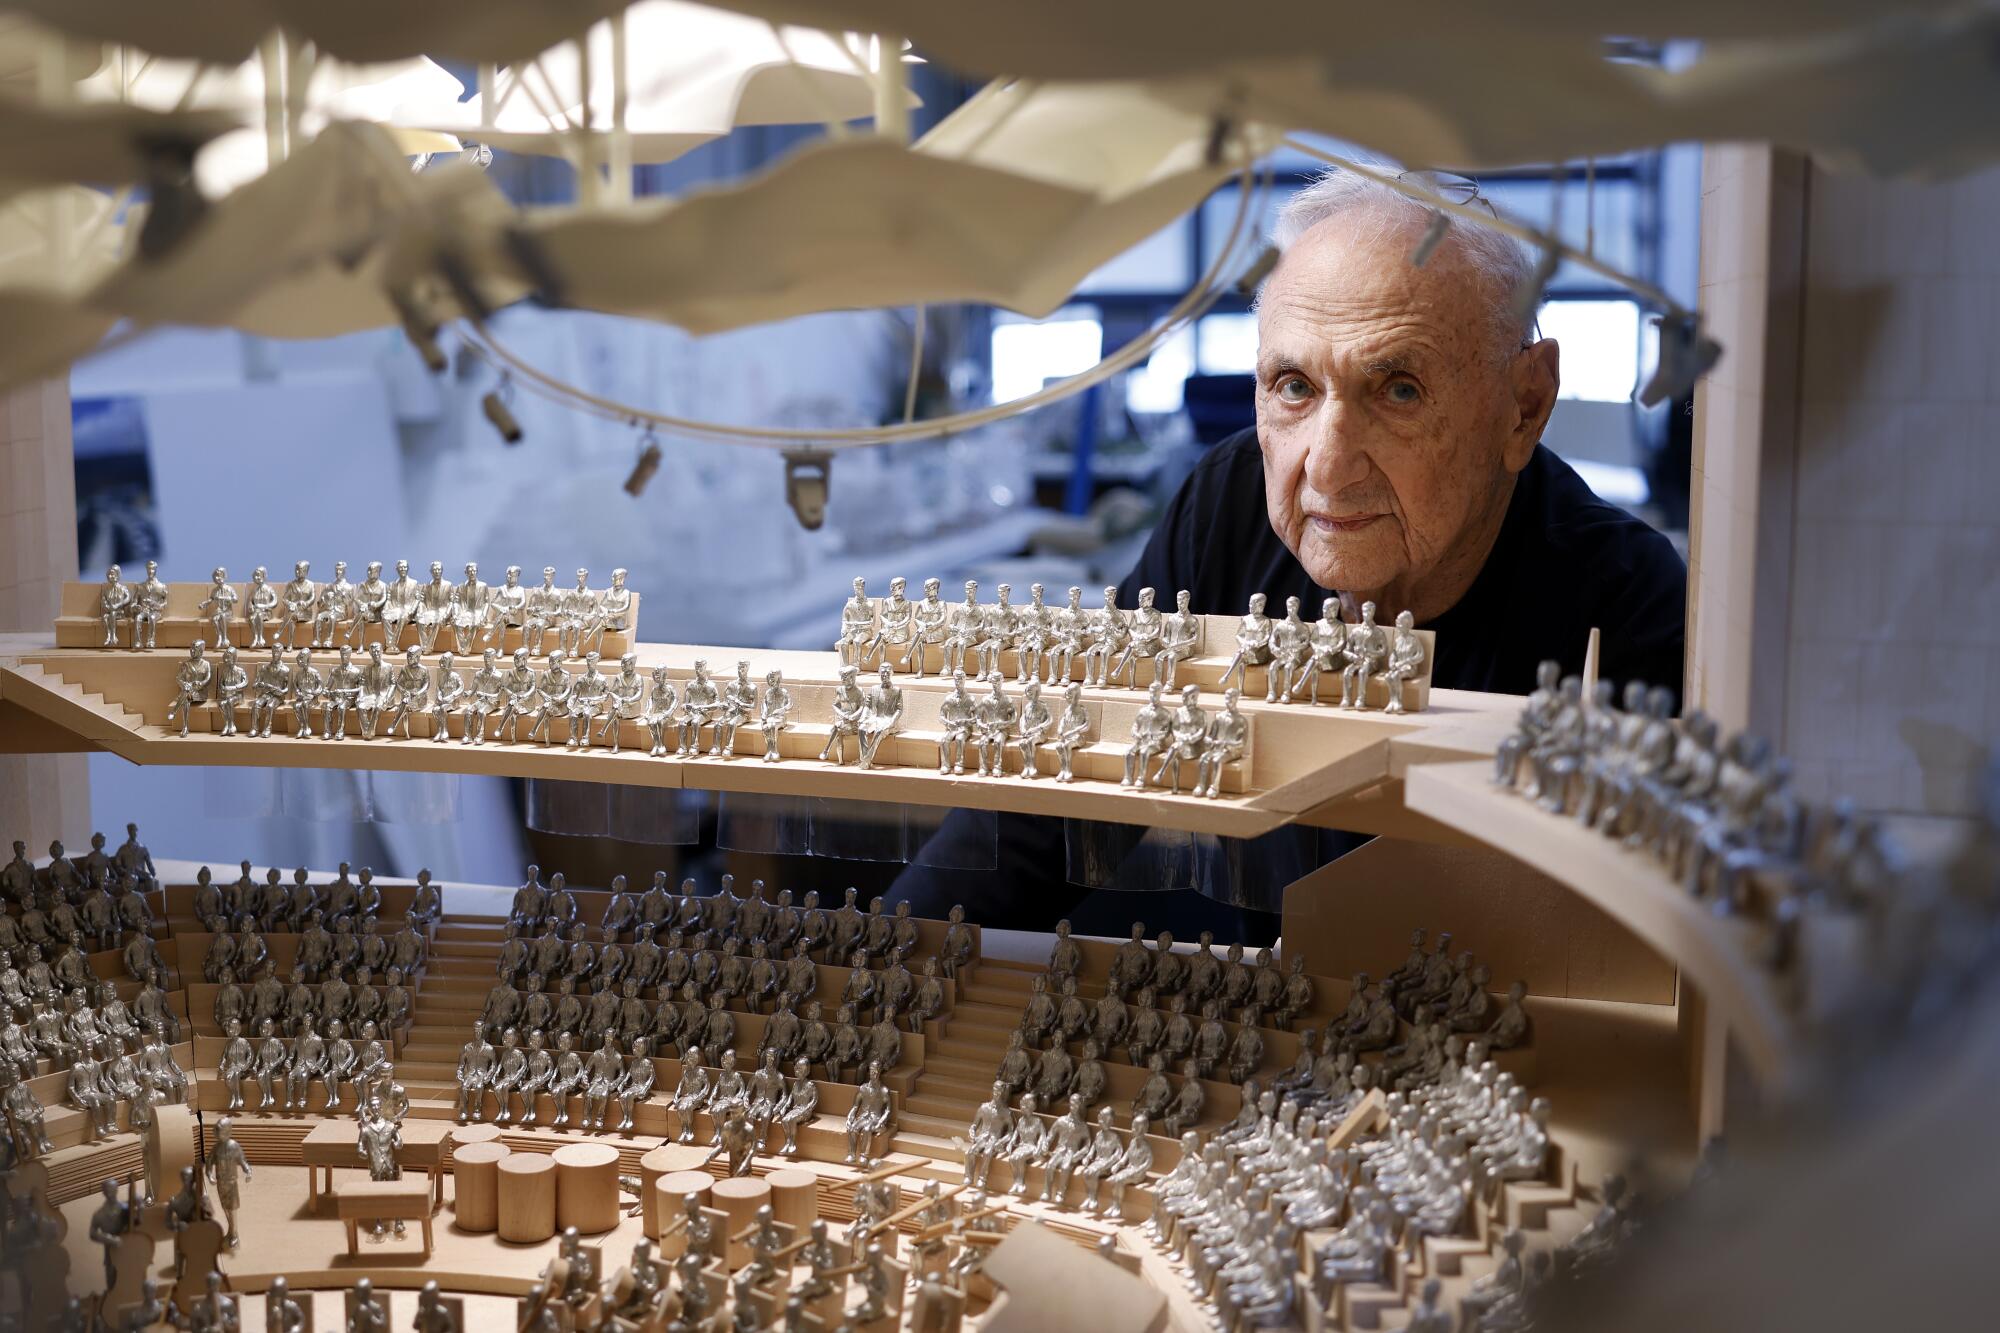 Architect Frank Gehry stands behind a model of his concert hall design 